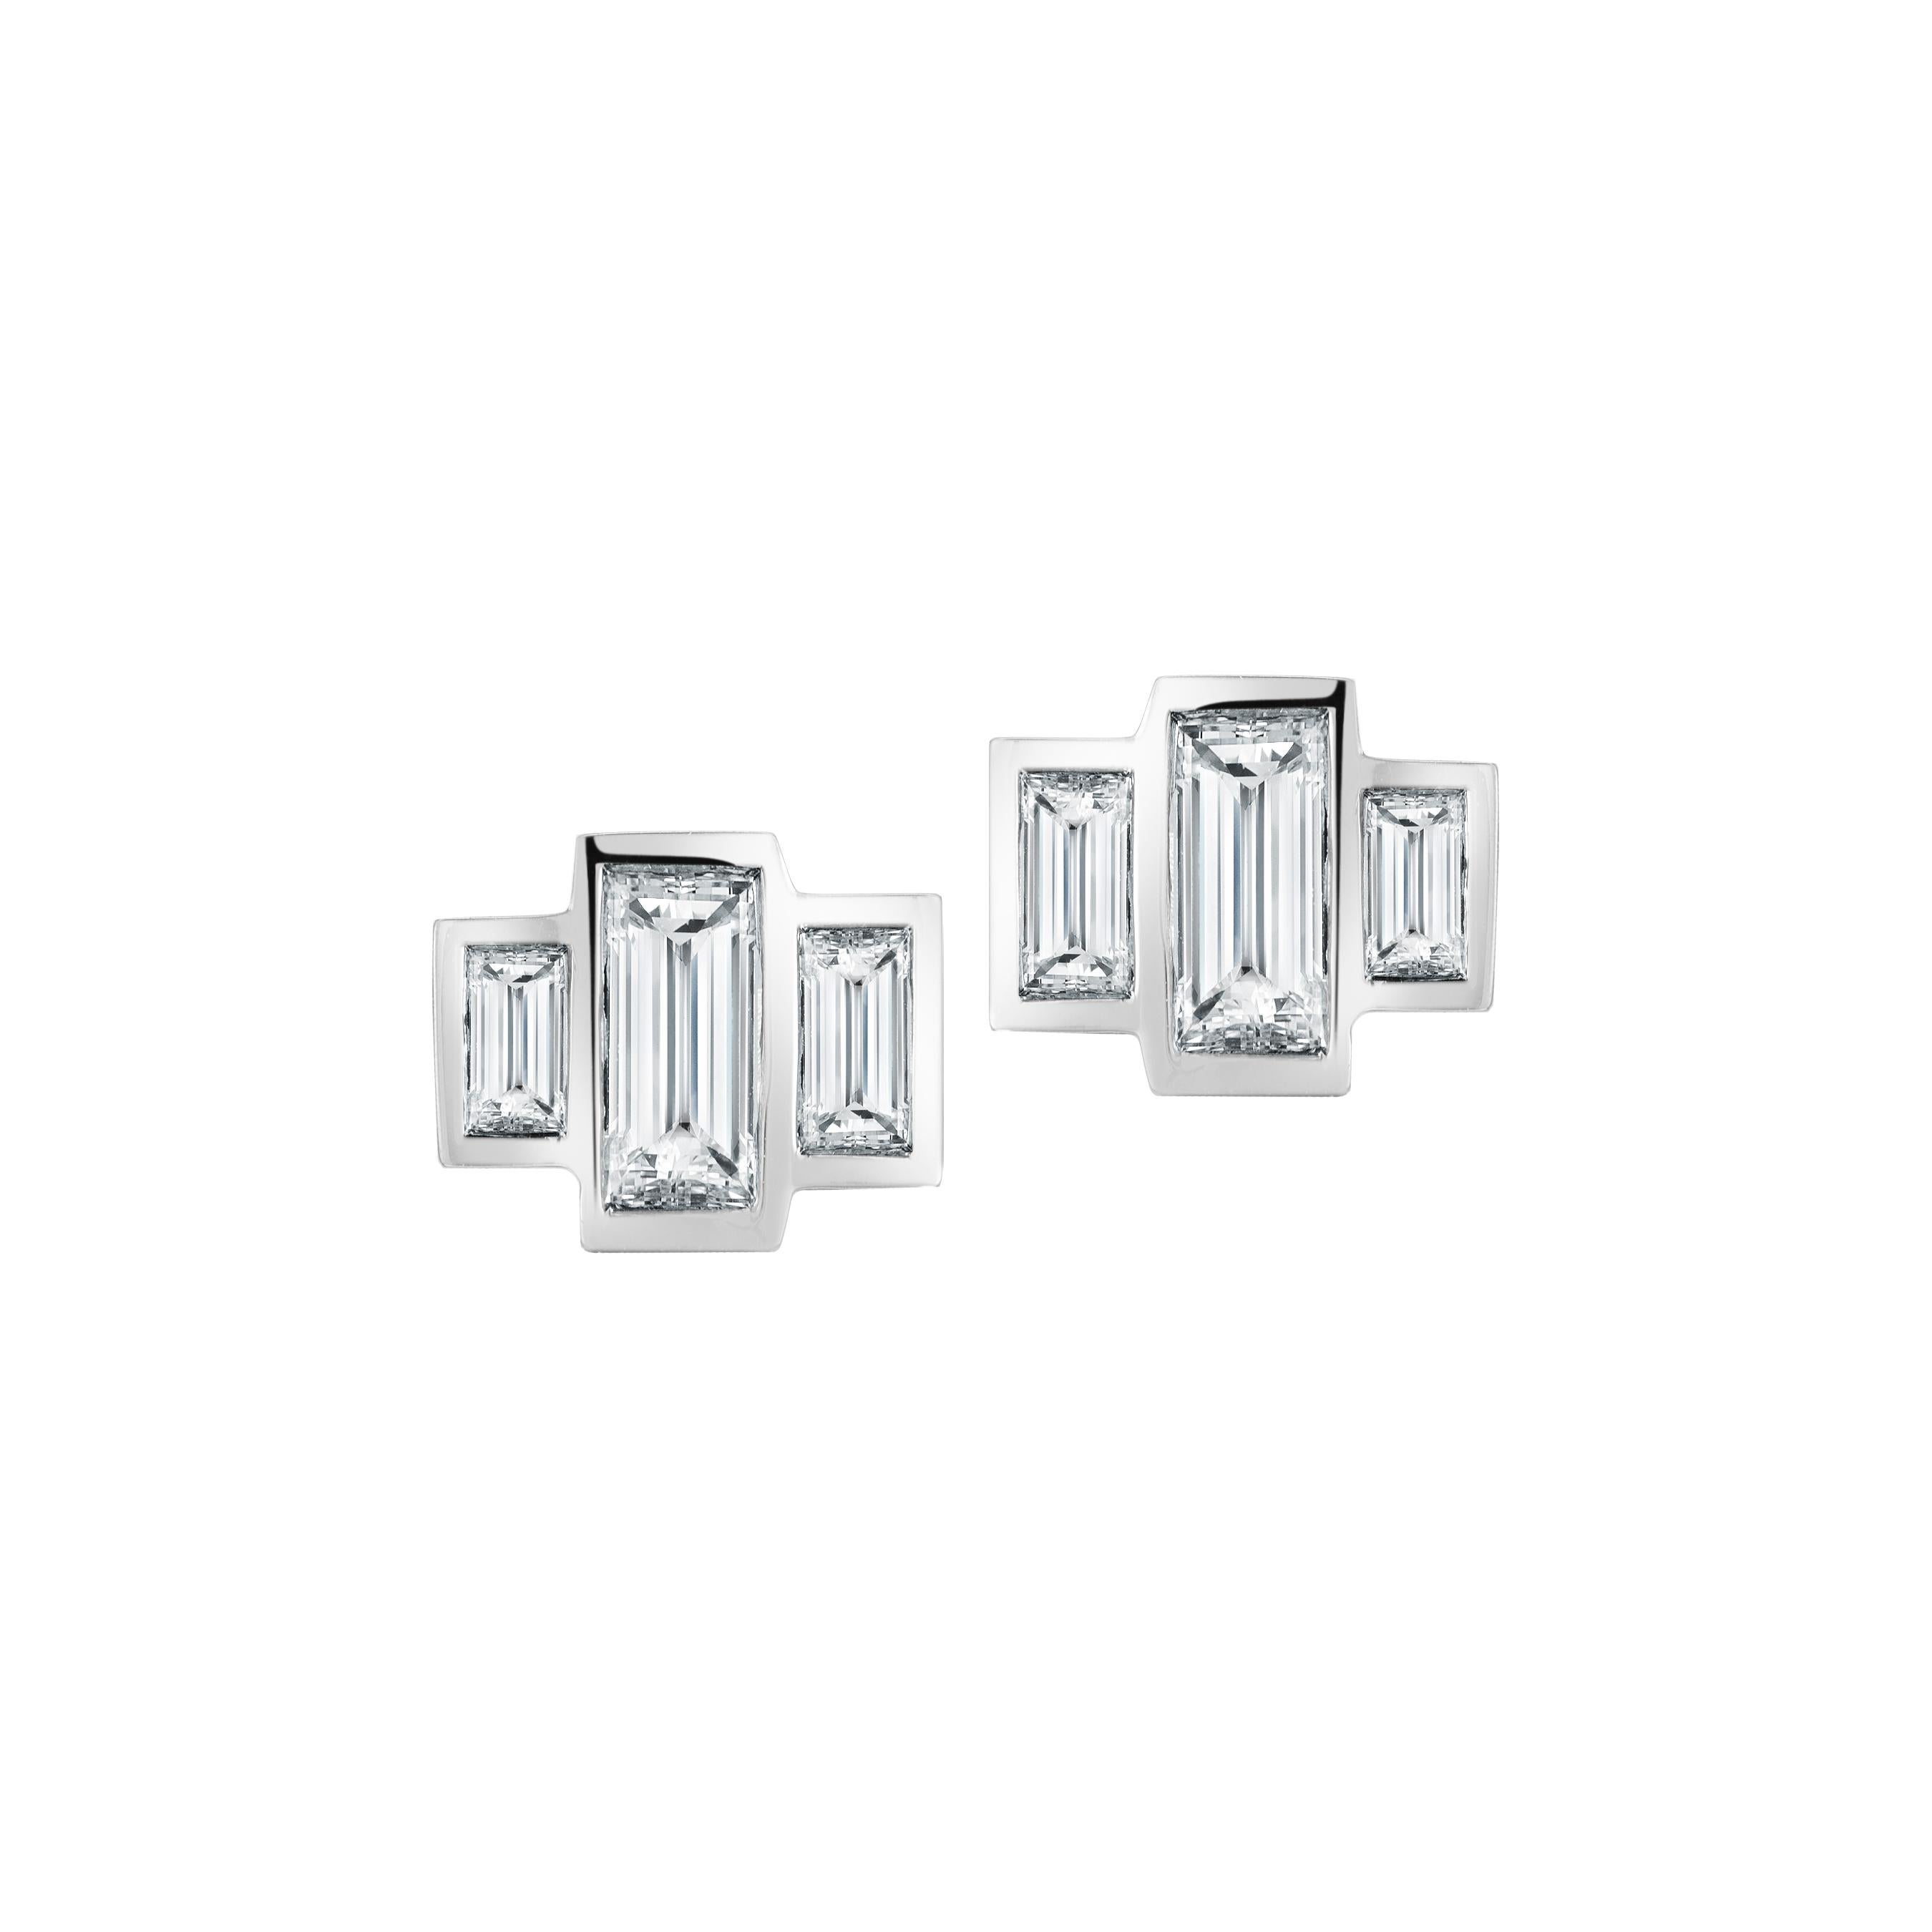 0.55 total Carat Mixed Baguette Stud Earrings

Elegant diamond studs that are as timeless as diamond solitaires, but with more personality.

18k white gold
6 mixed size baguettes
0.55 carats total
post backs
just over 1/4